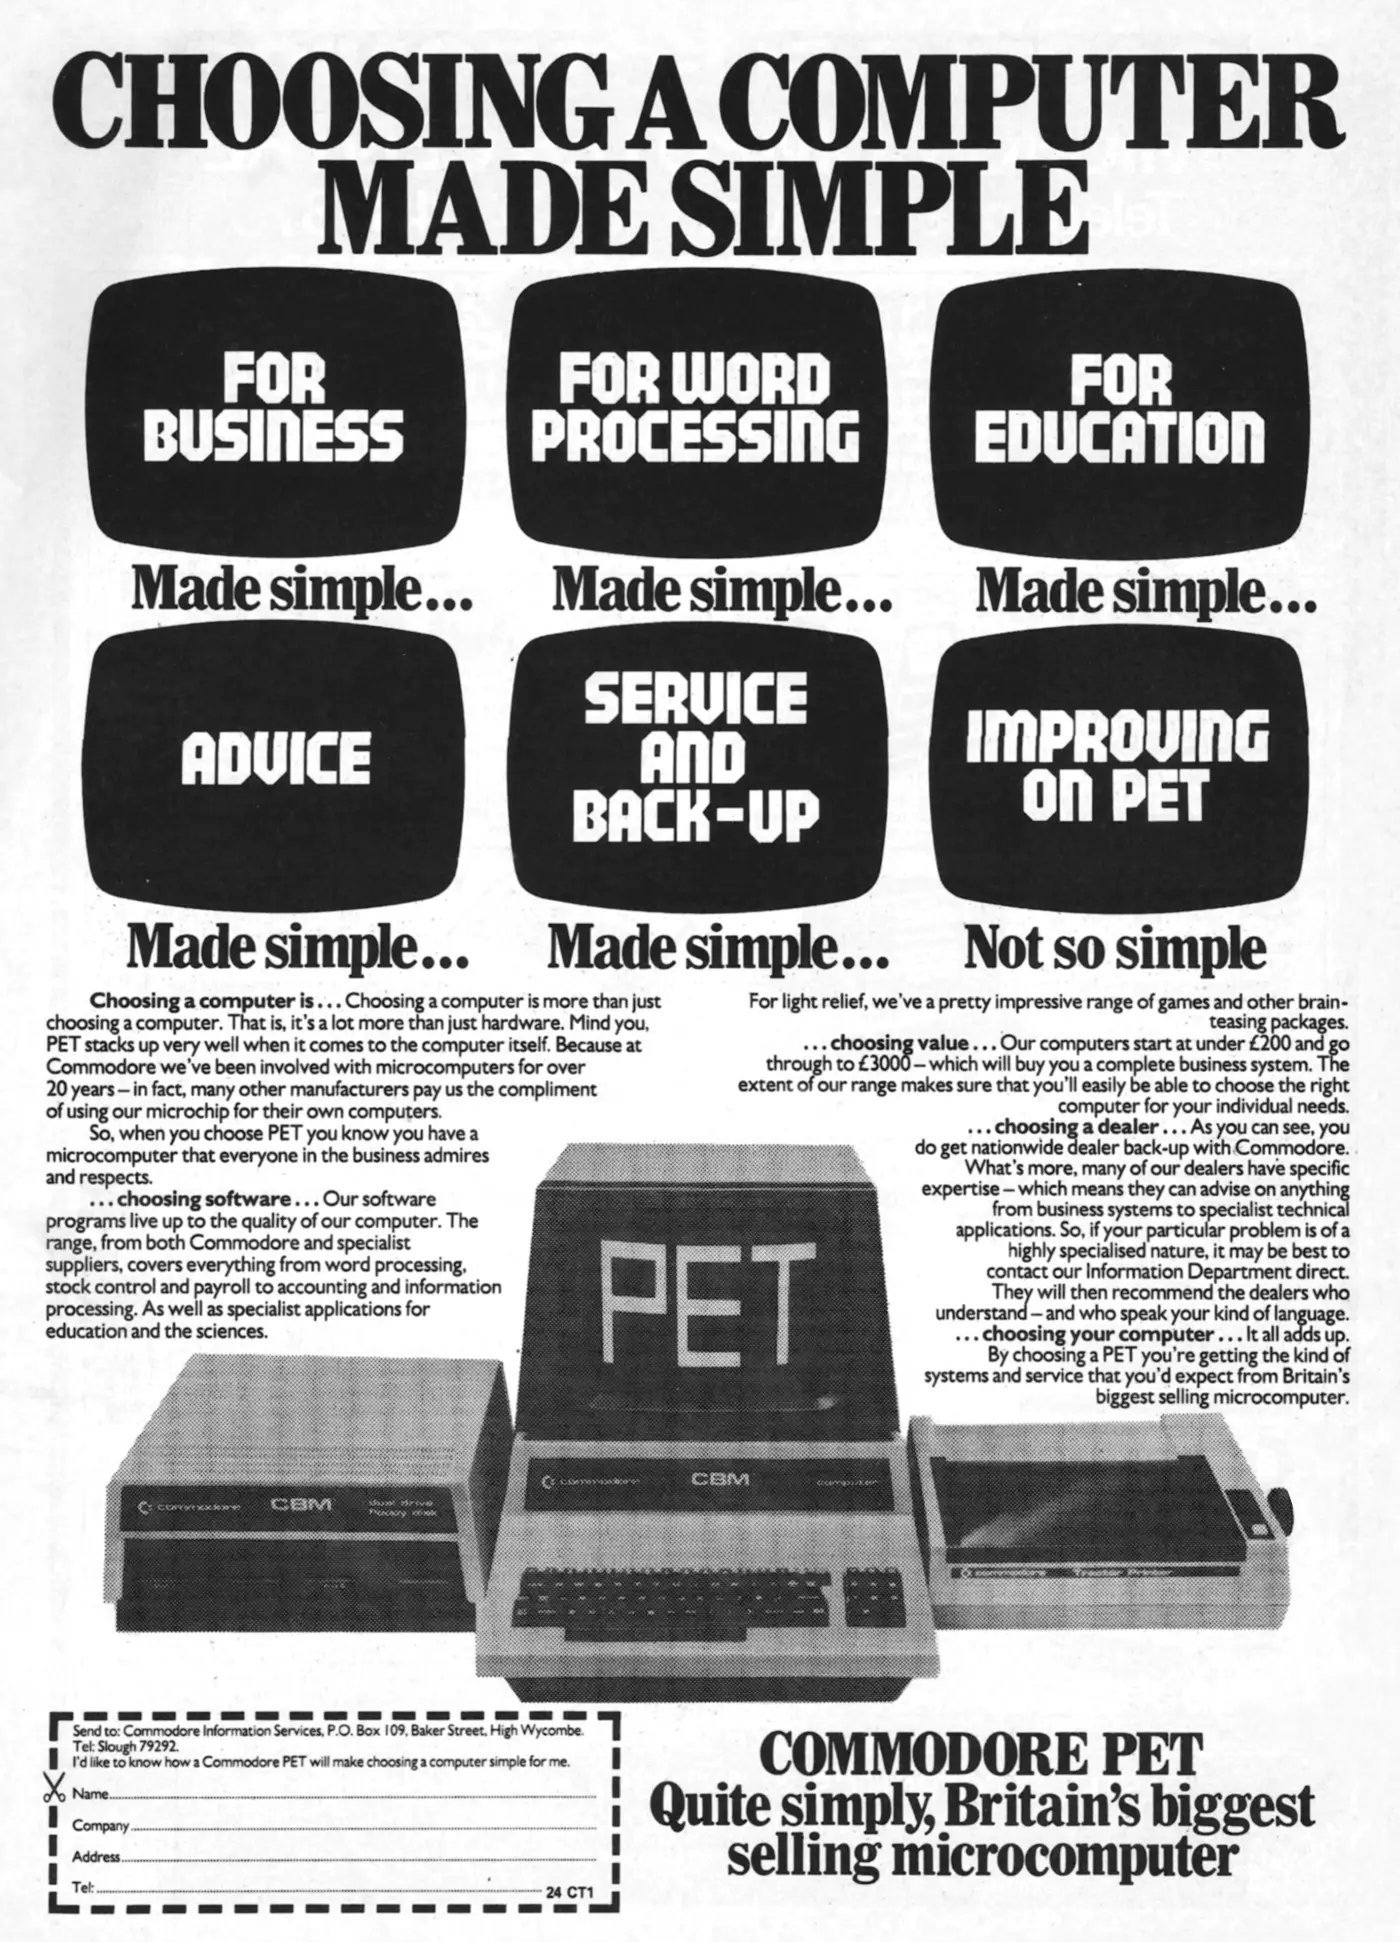 Commodore Advert: Commodore PET: Choosing a Computer Made Simple, from Computing Today, September 1981